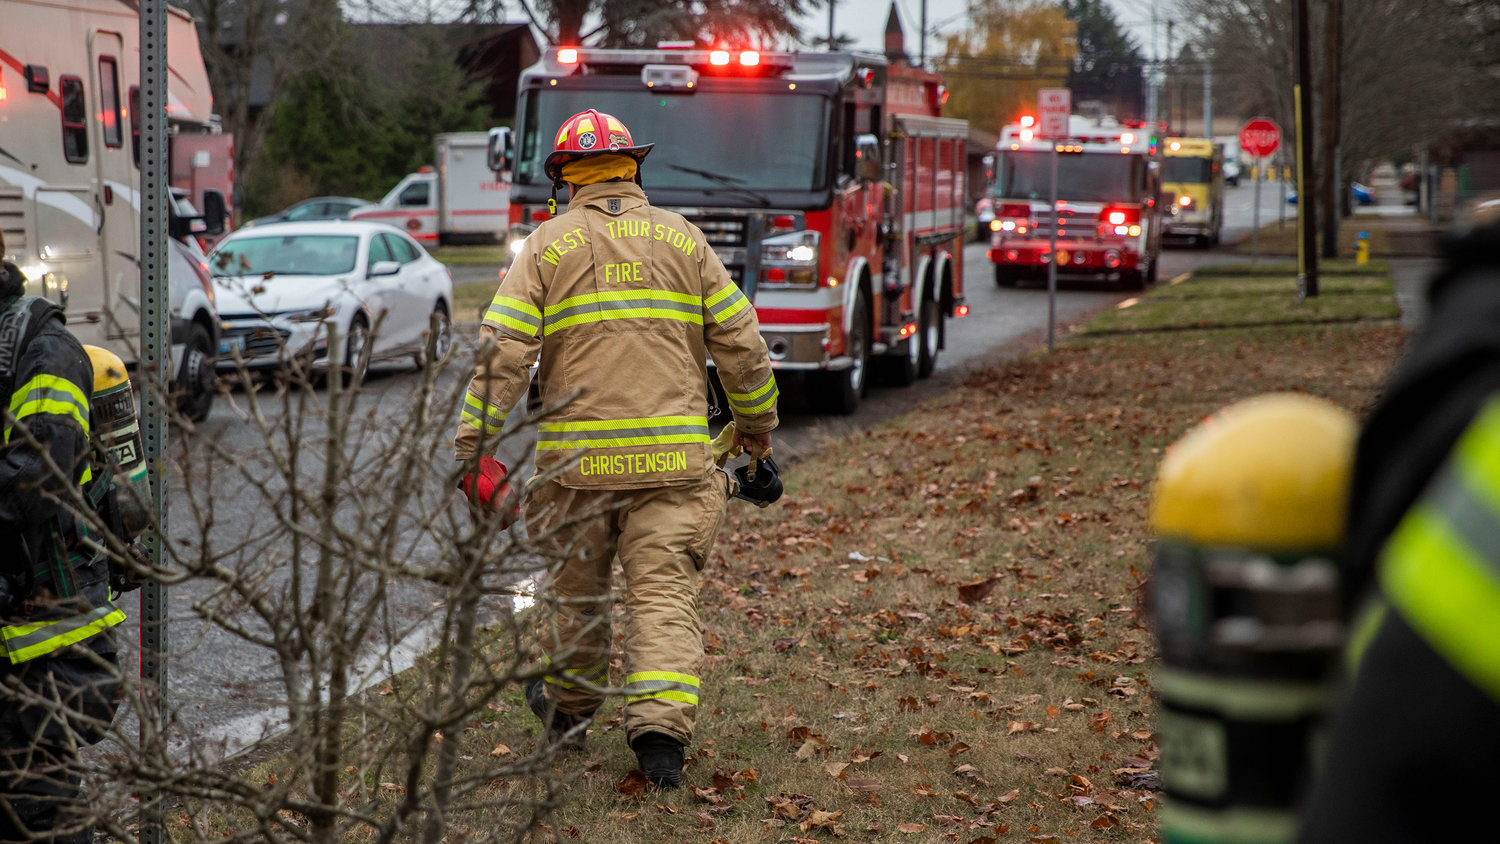 West Thurston Fire responds to the scene of a residential fire in the 200 block of North Rock Street in Centralia on Friday to assist the Riverside Fire Authority.